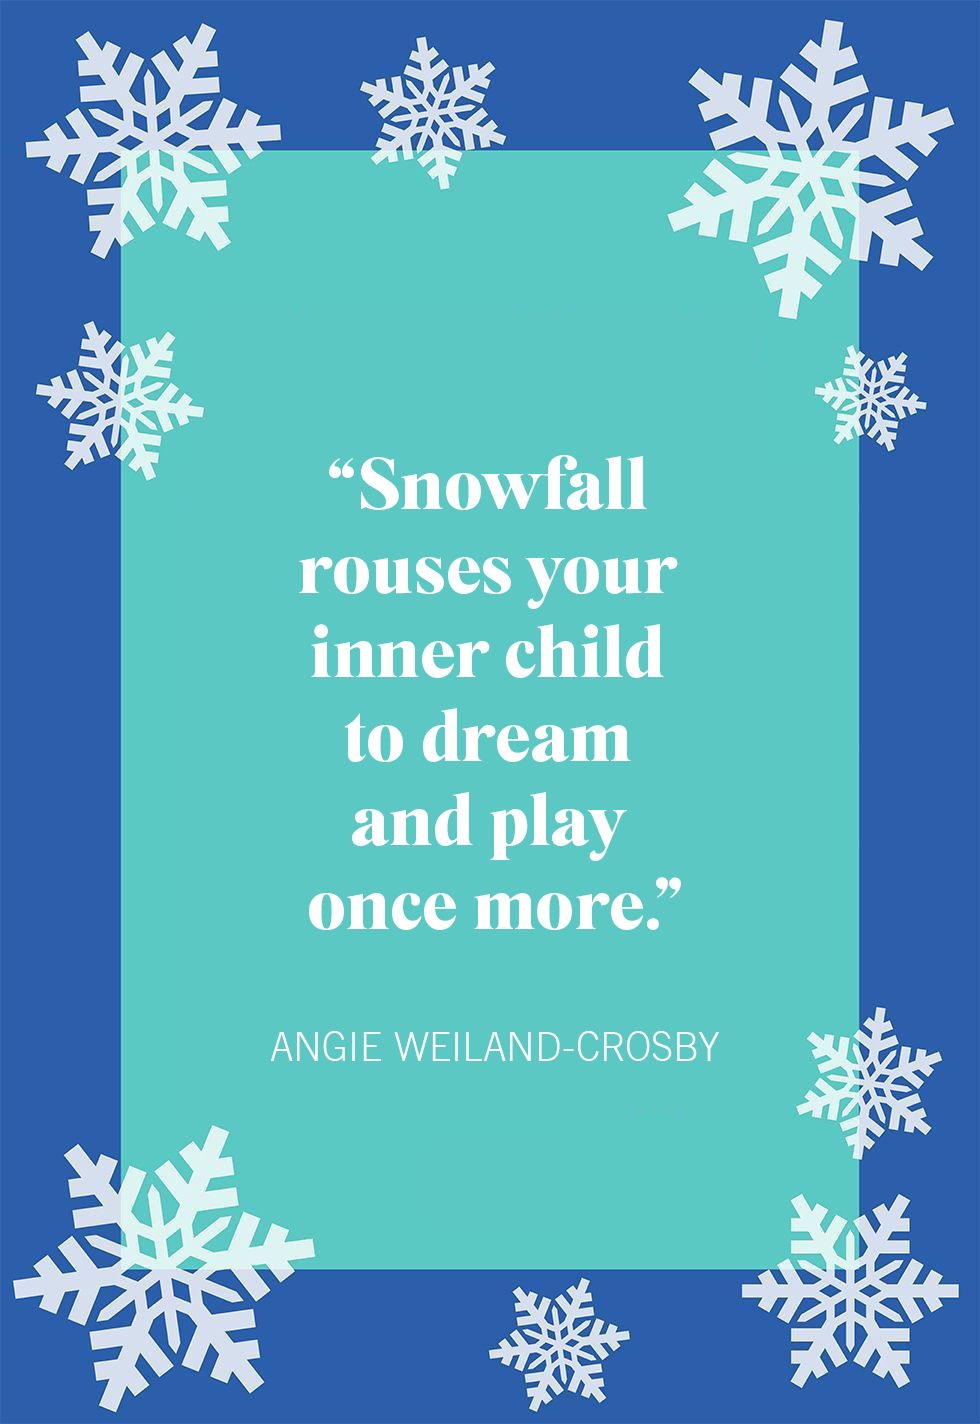 20 Best Snow Quotes - Cute Snow Quotes and Sayings